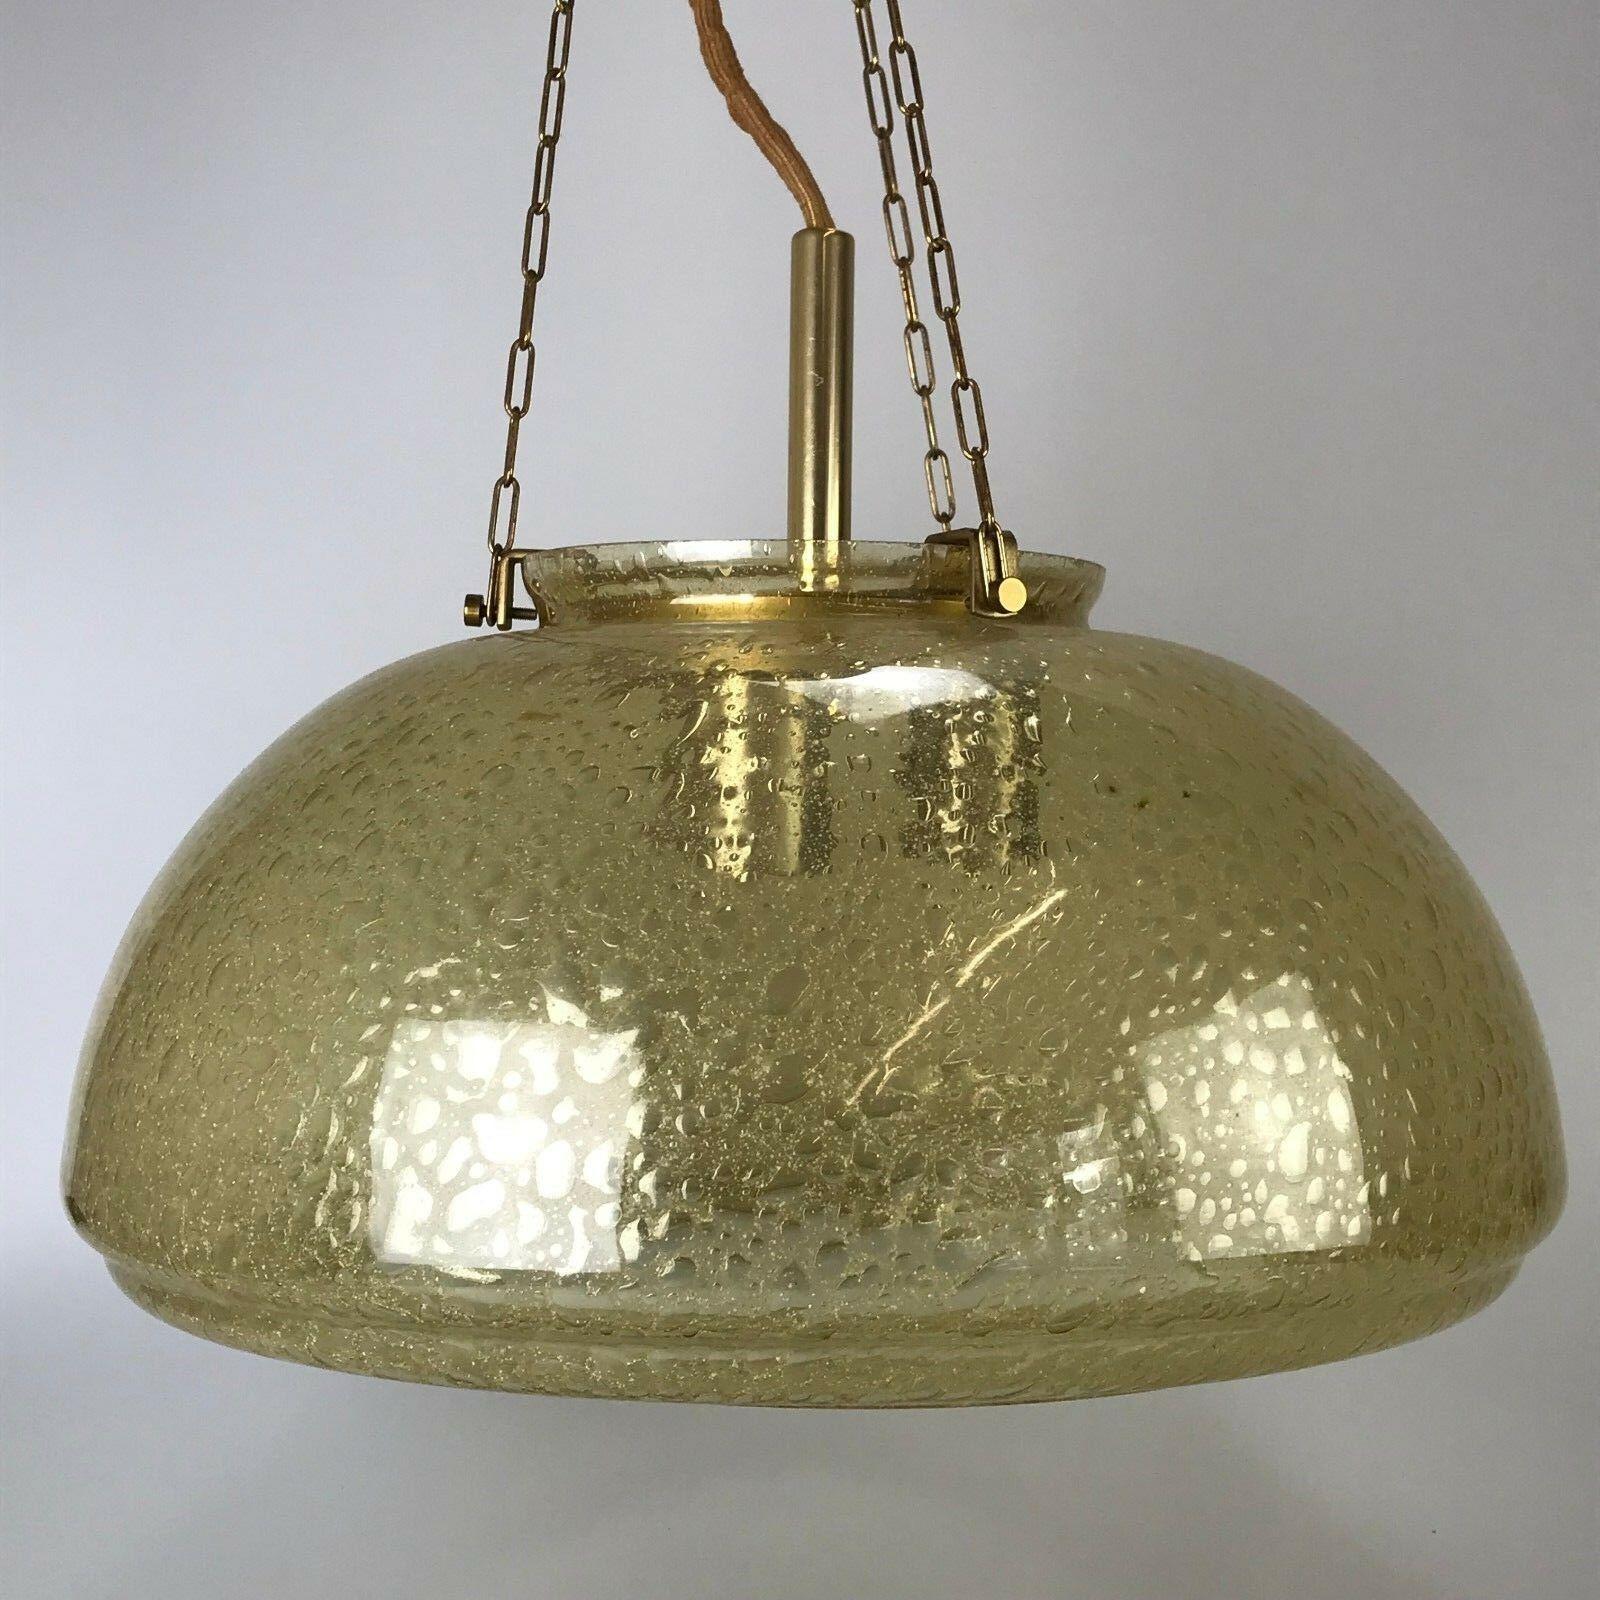 60s 70s lamp light ceiling lamp hanging lamp Doria Glas Space Age Design

Object: hanging lamp

Manufacturer: Doria

Condition: good

Age: around 1960-1970

Dimensions:

Diameter = 44cm
Hanging height = 57cm

Other notes:

The